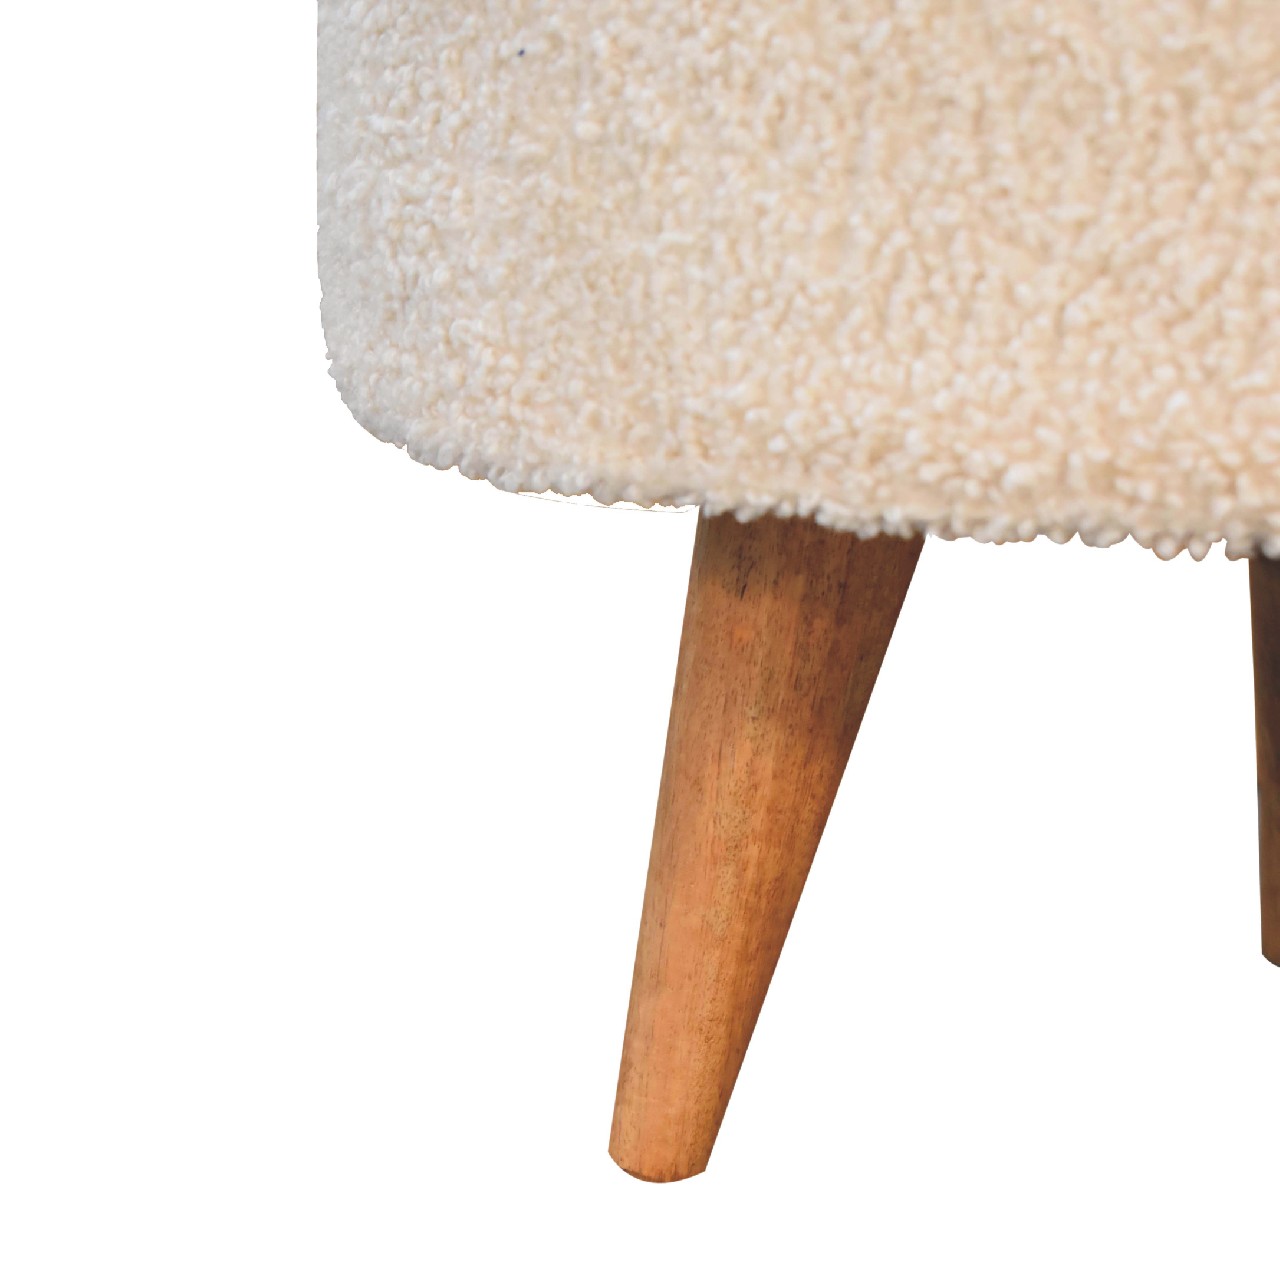 Cream Boucle Rounded Footstool